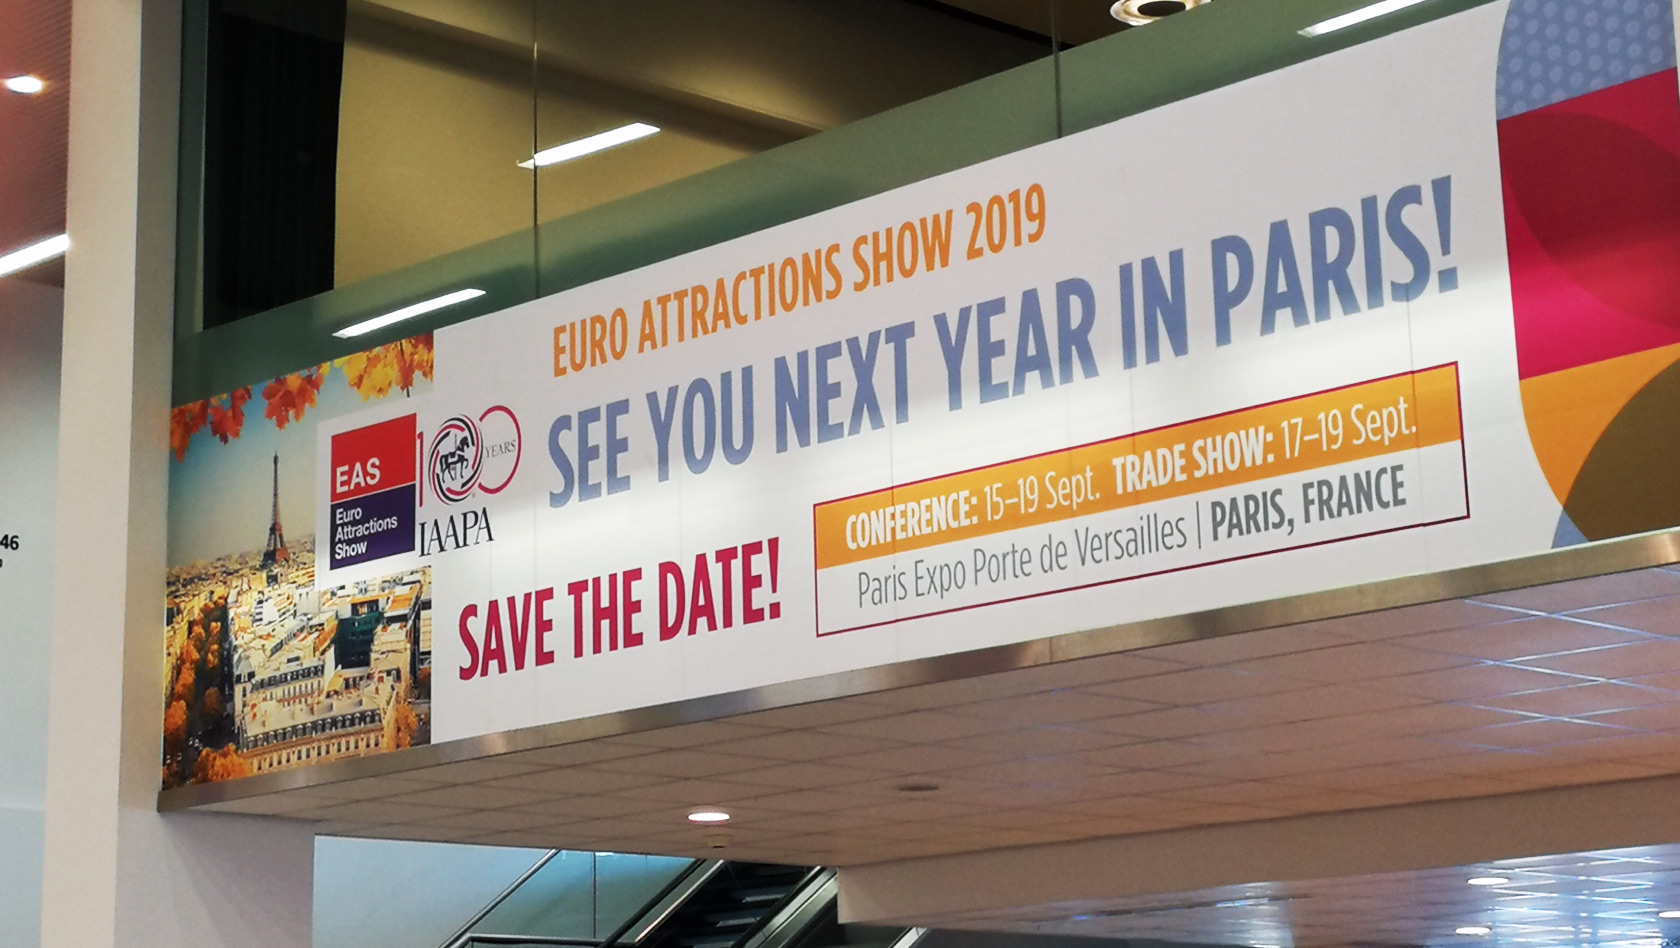 Euro Attractions Show 2019